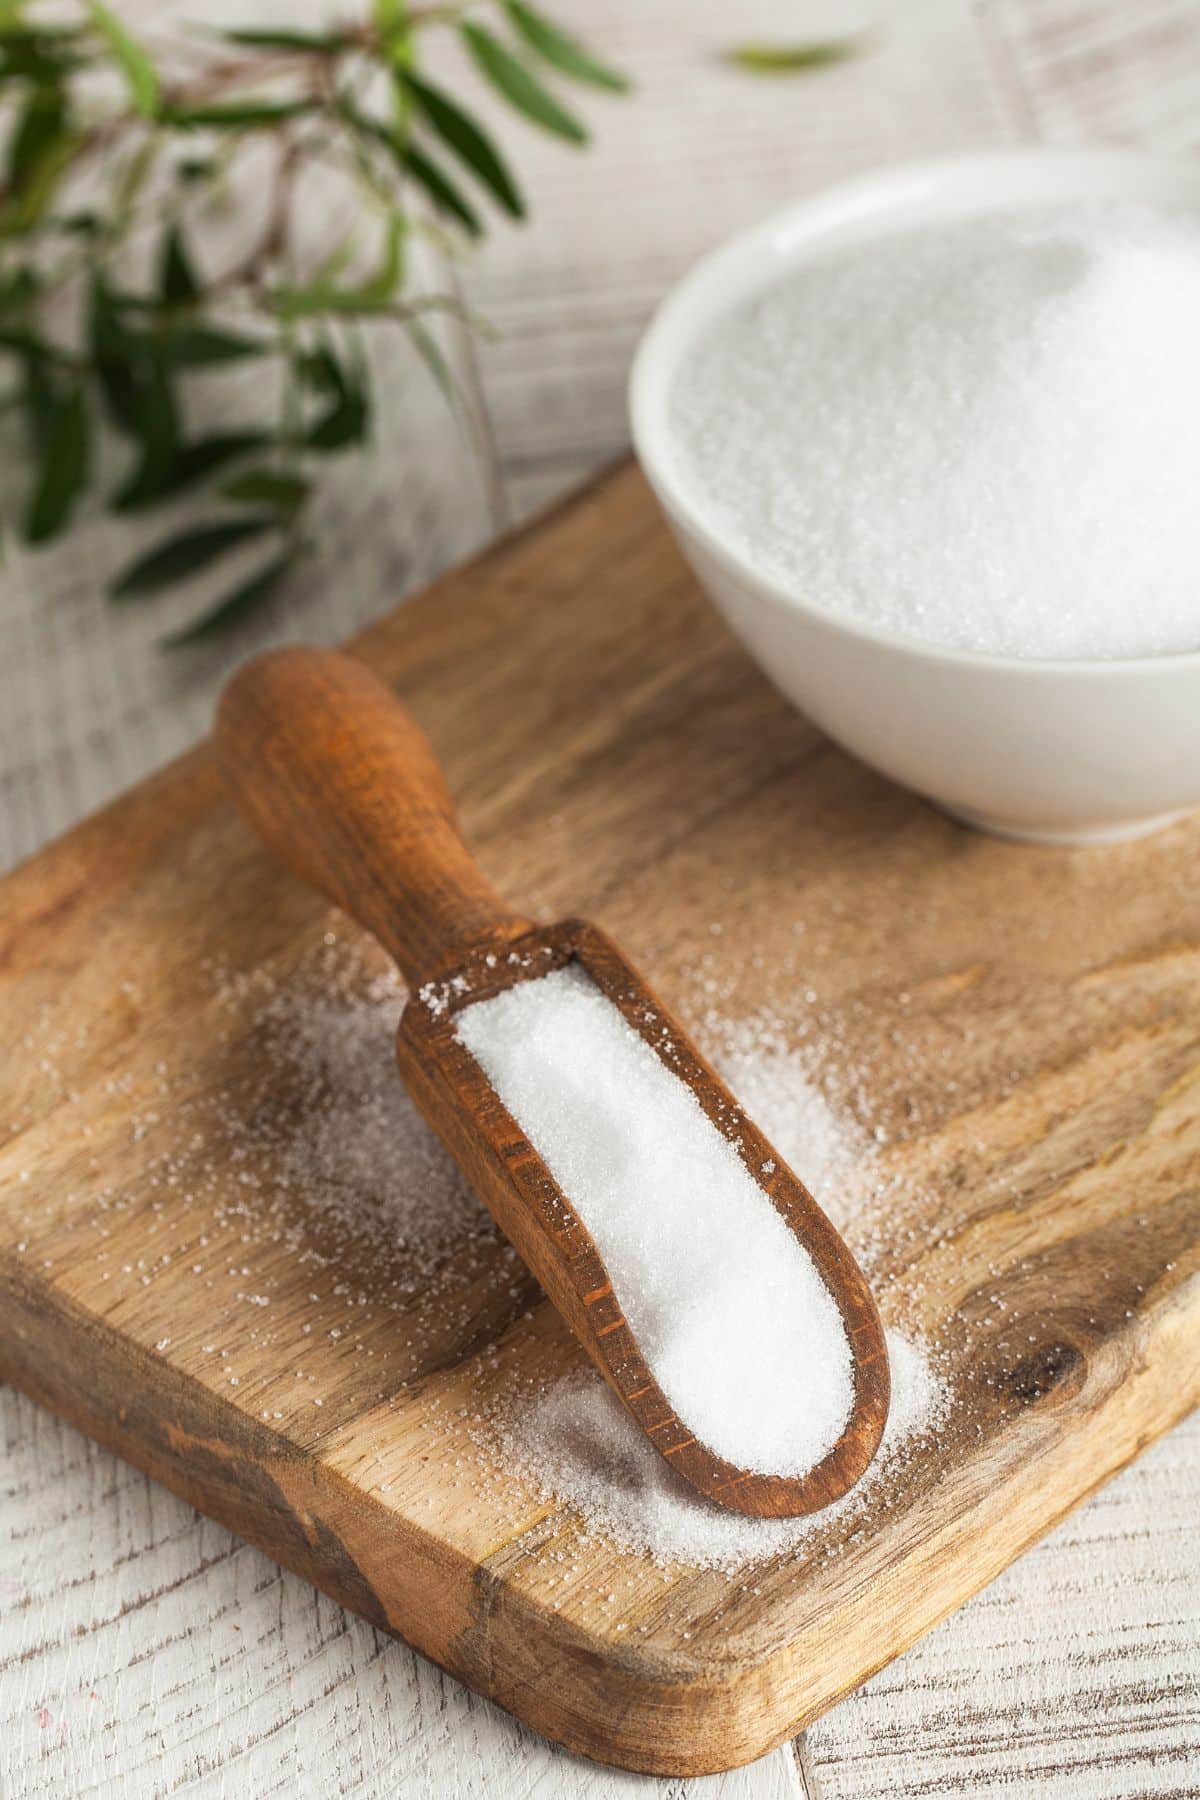 powdered erythritol in a wooden spoon.